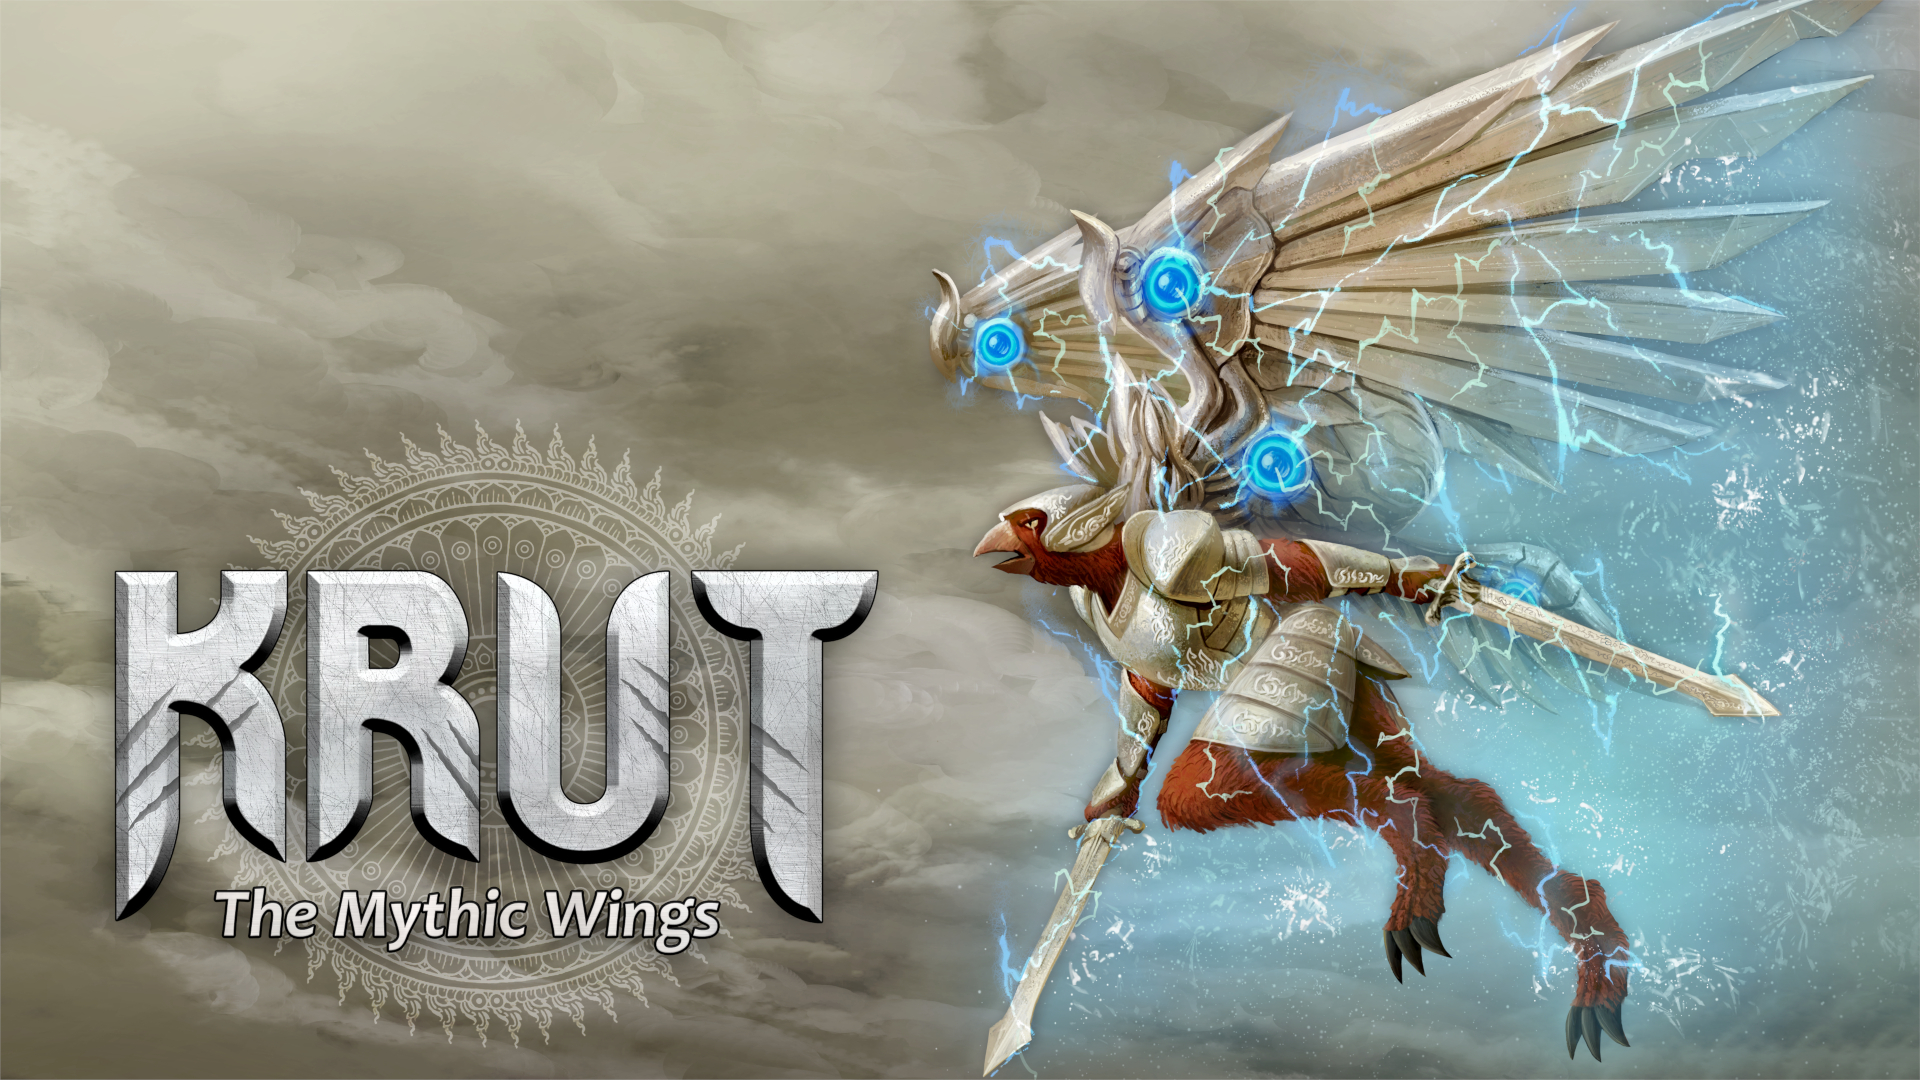 Krut: The Mythic Wings review – Who’s the cat with the beak?